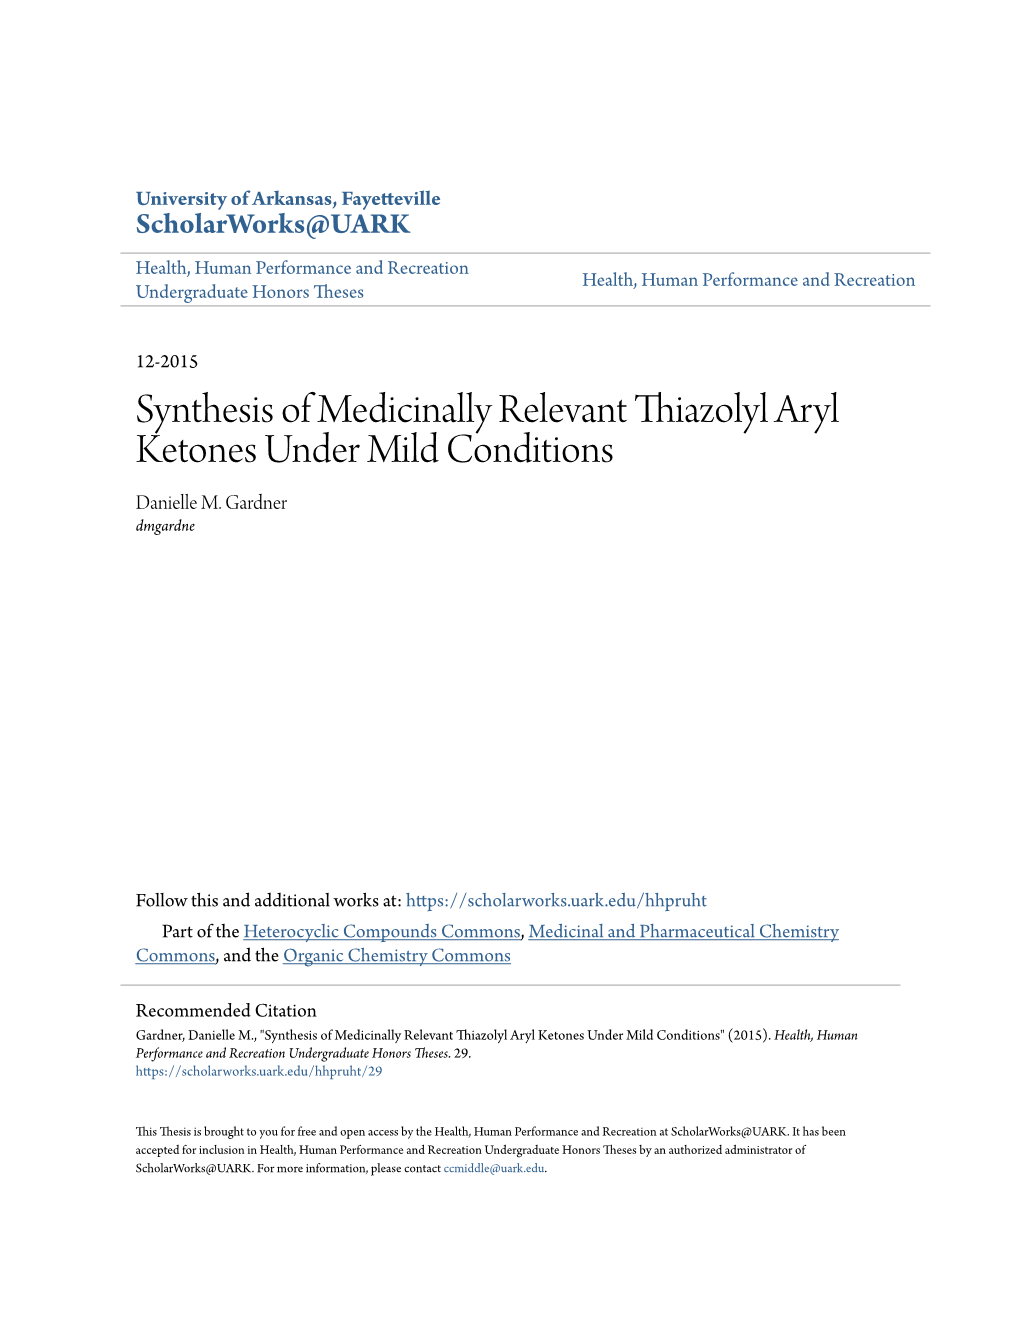 Synthesis of Medicinally Relevant Thiazolyl Aryl Ketones Under Mild Conditions Danielle M